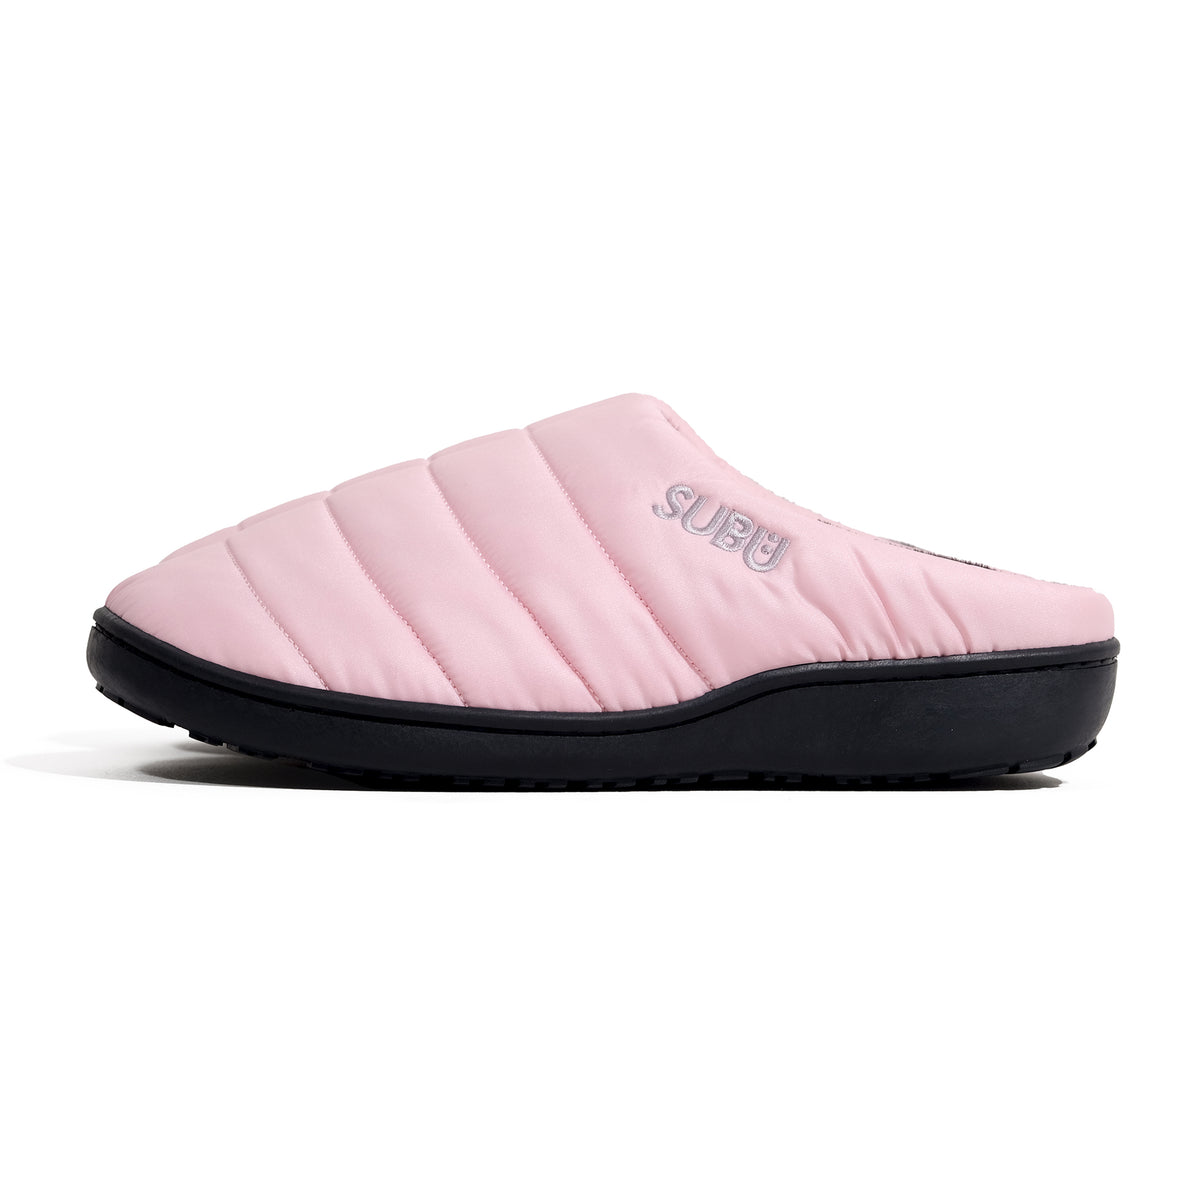 SUBU, Fall & Winter Slippers Pink, Size, 0, Slippers,